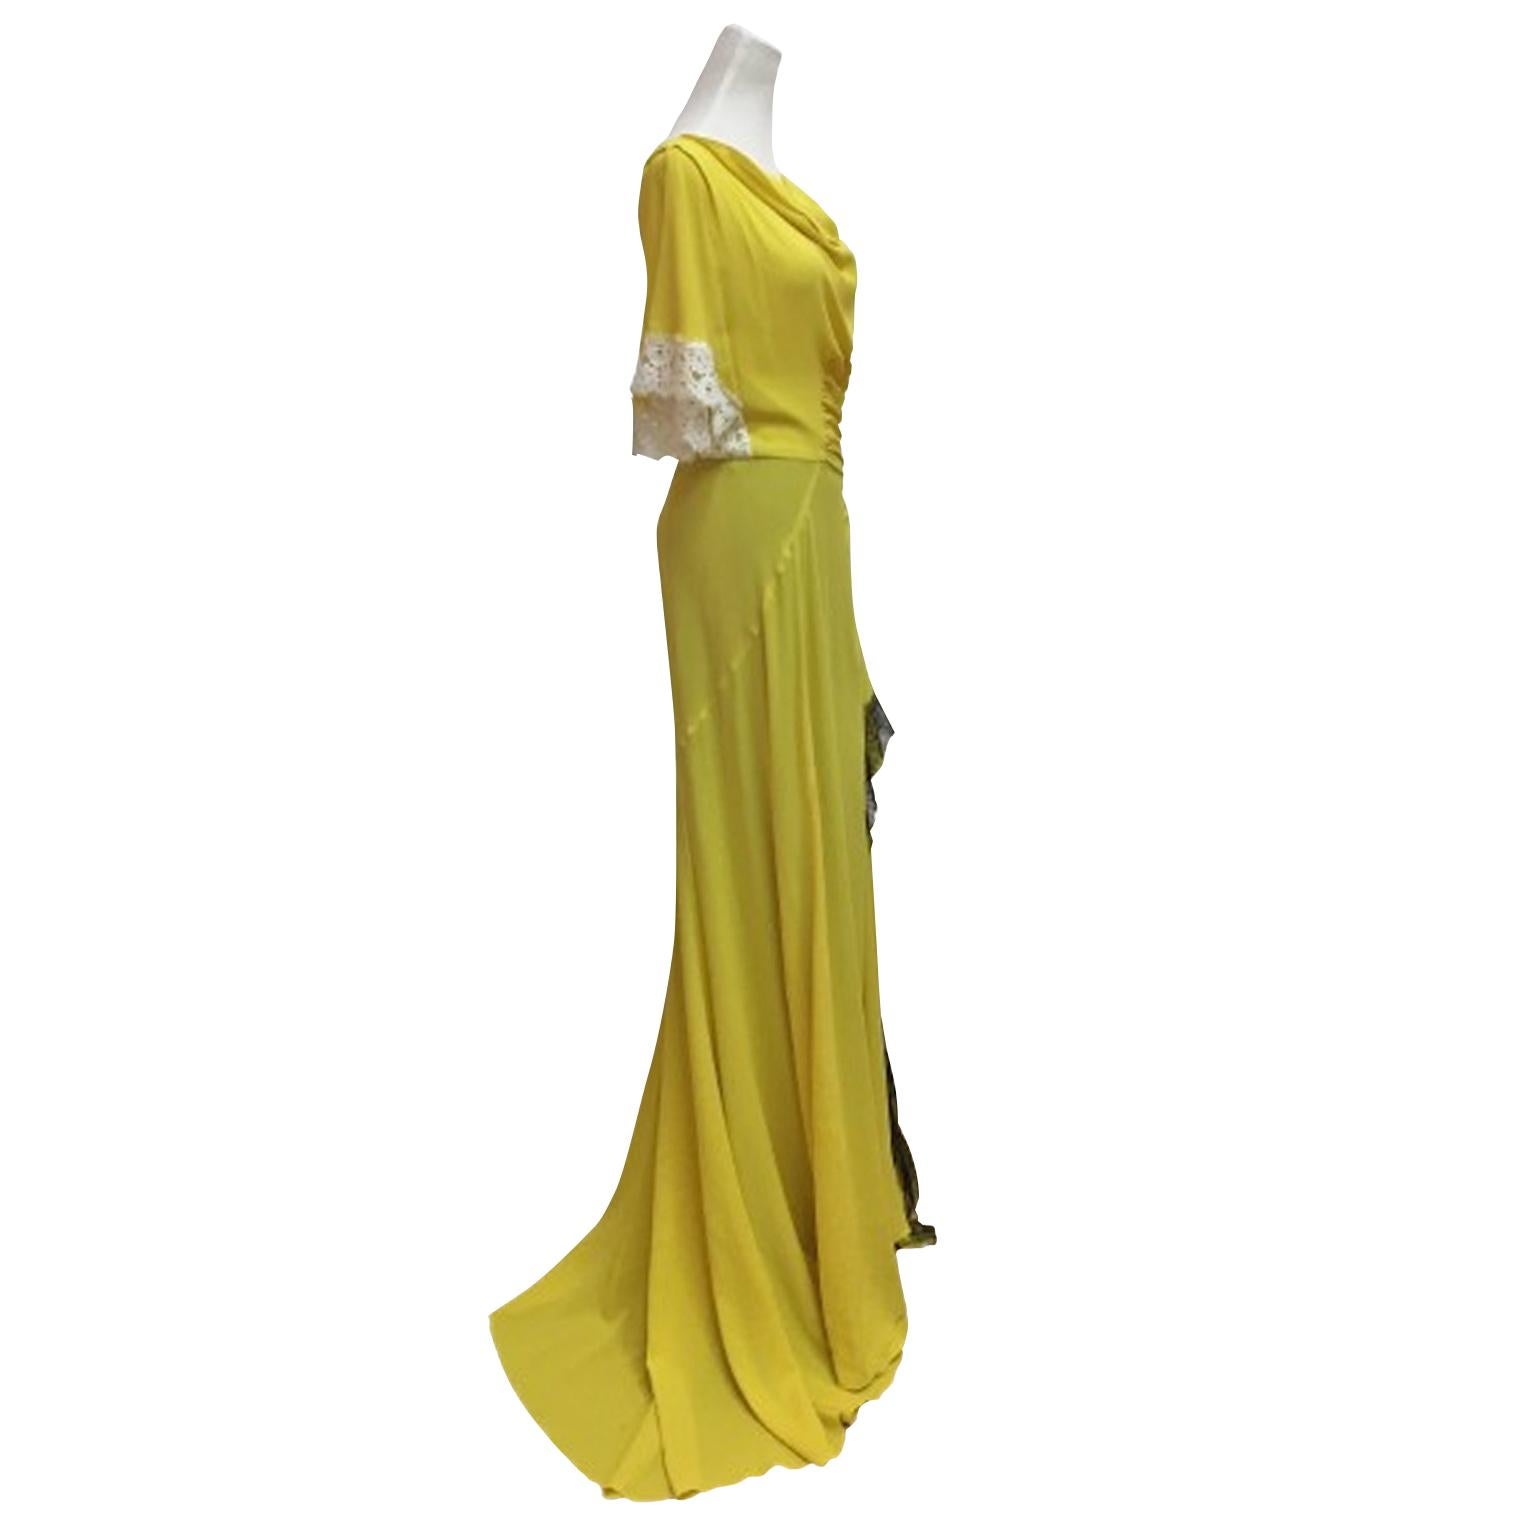 Nina Ricci Olivier Theyskens Sample Dress Gown Yellow Black Lace circa 2010 In Good Condition For Sale In Berlin, DE